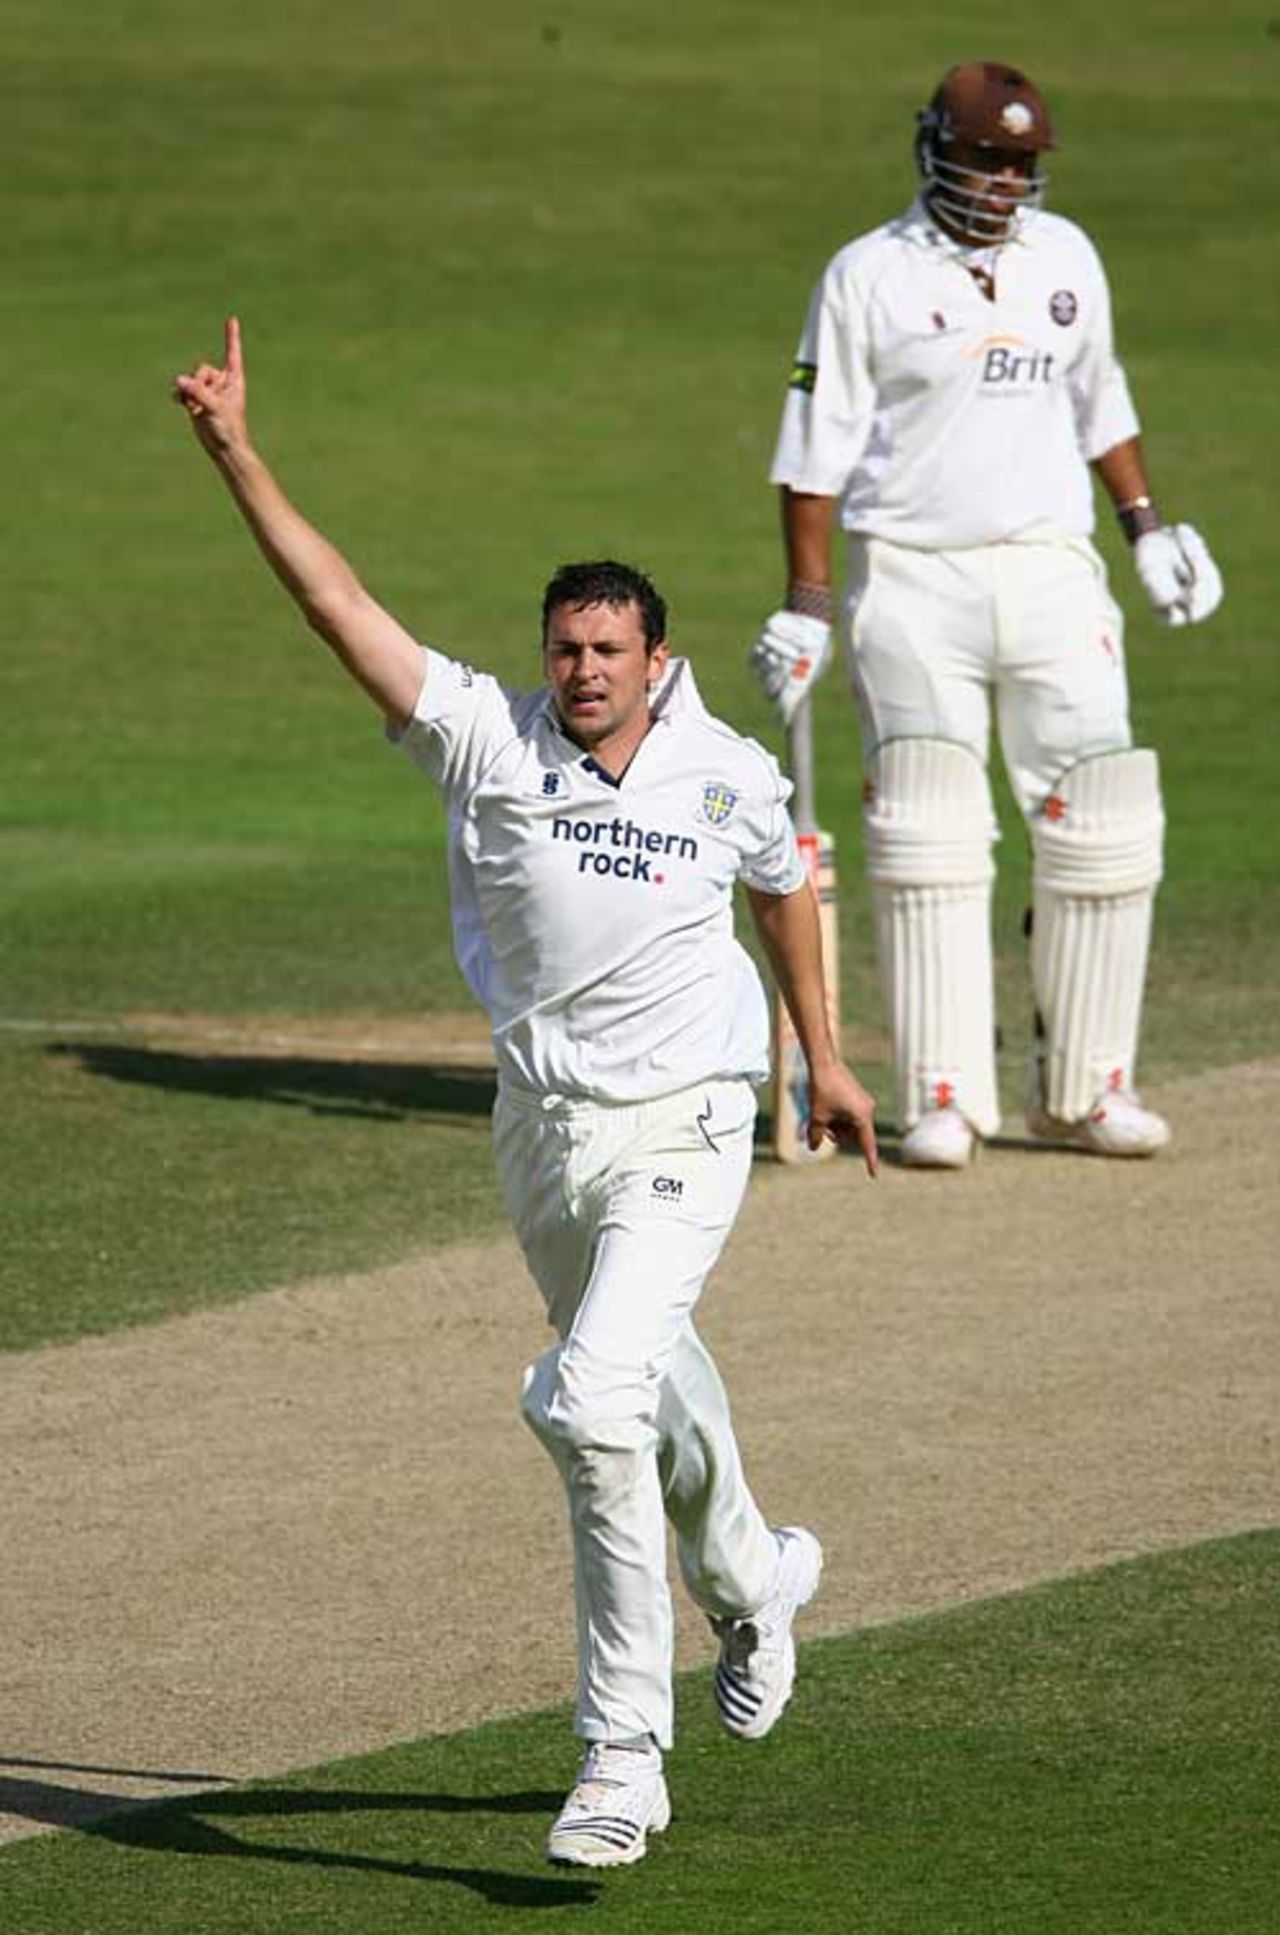 Steve Harmison took three quick wickets as Surrey began their run chase, Surrey v Durham, County Championship, The Oval, July 9, 2007